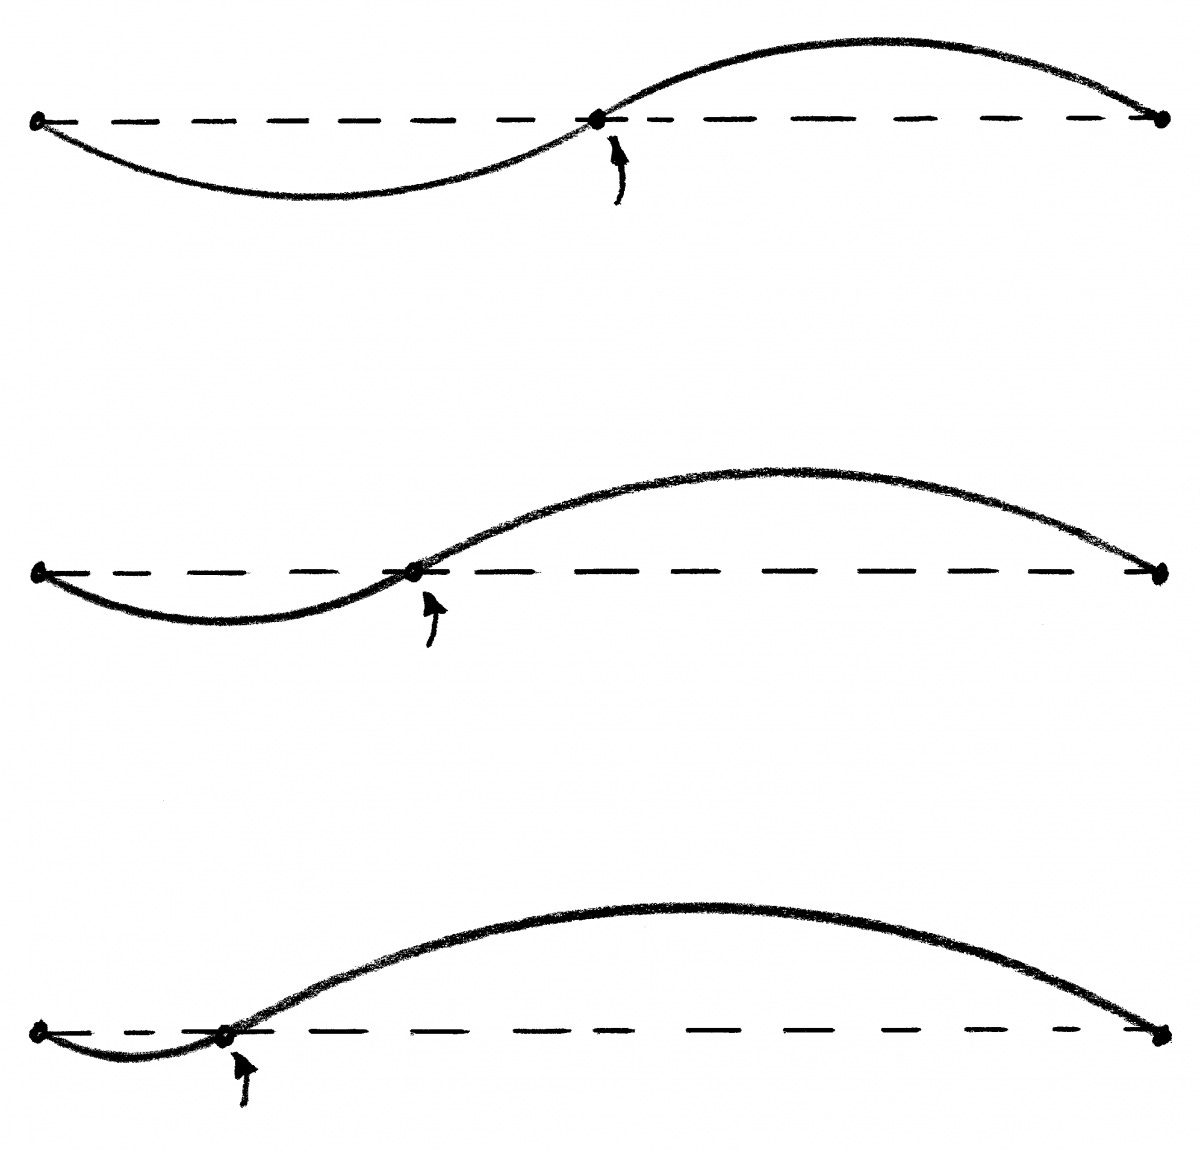 Cyma or “S” curves always flow with reference to an invisible straight line or “chord”